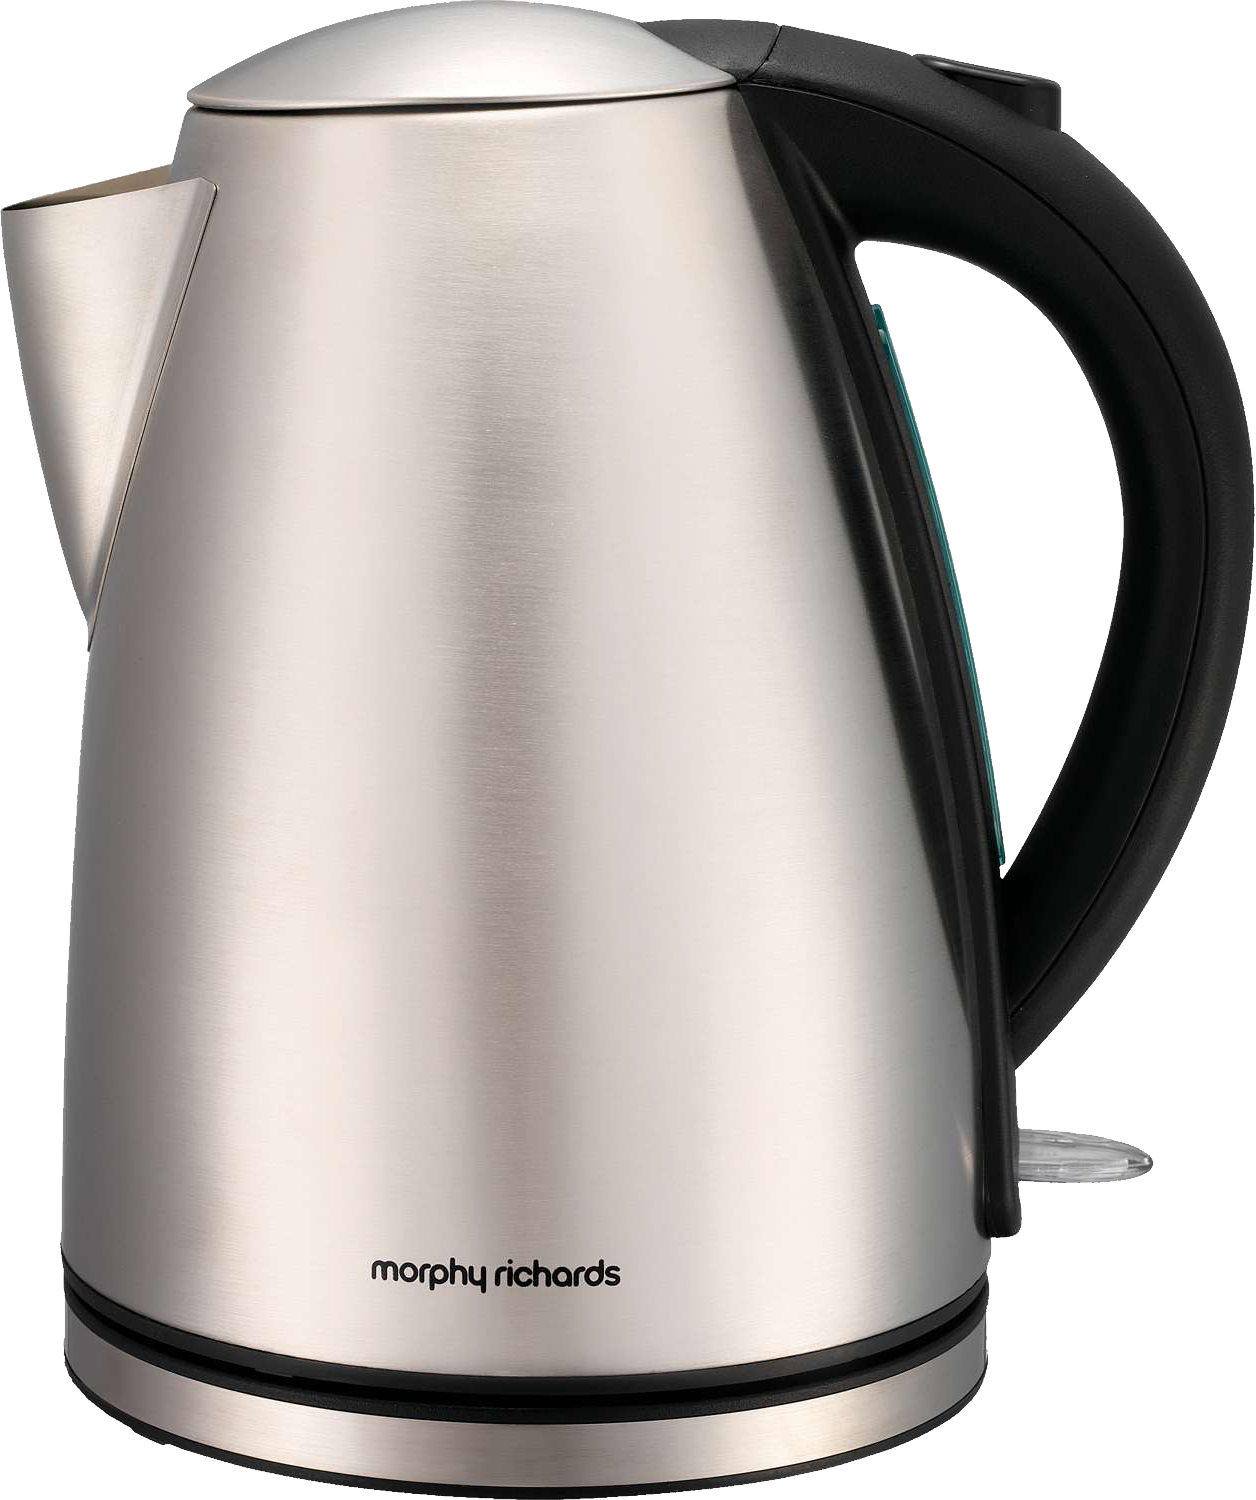 Kettle PNG image, Kettle PNG - Free PNG